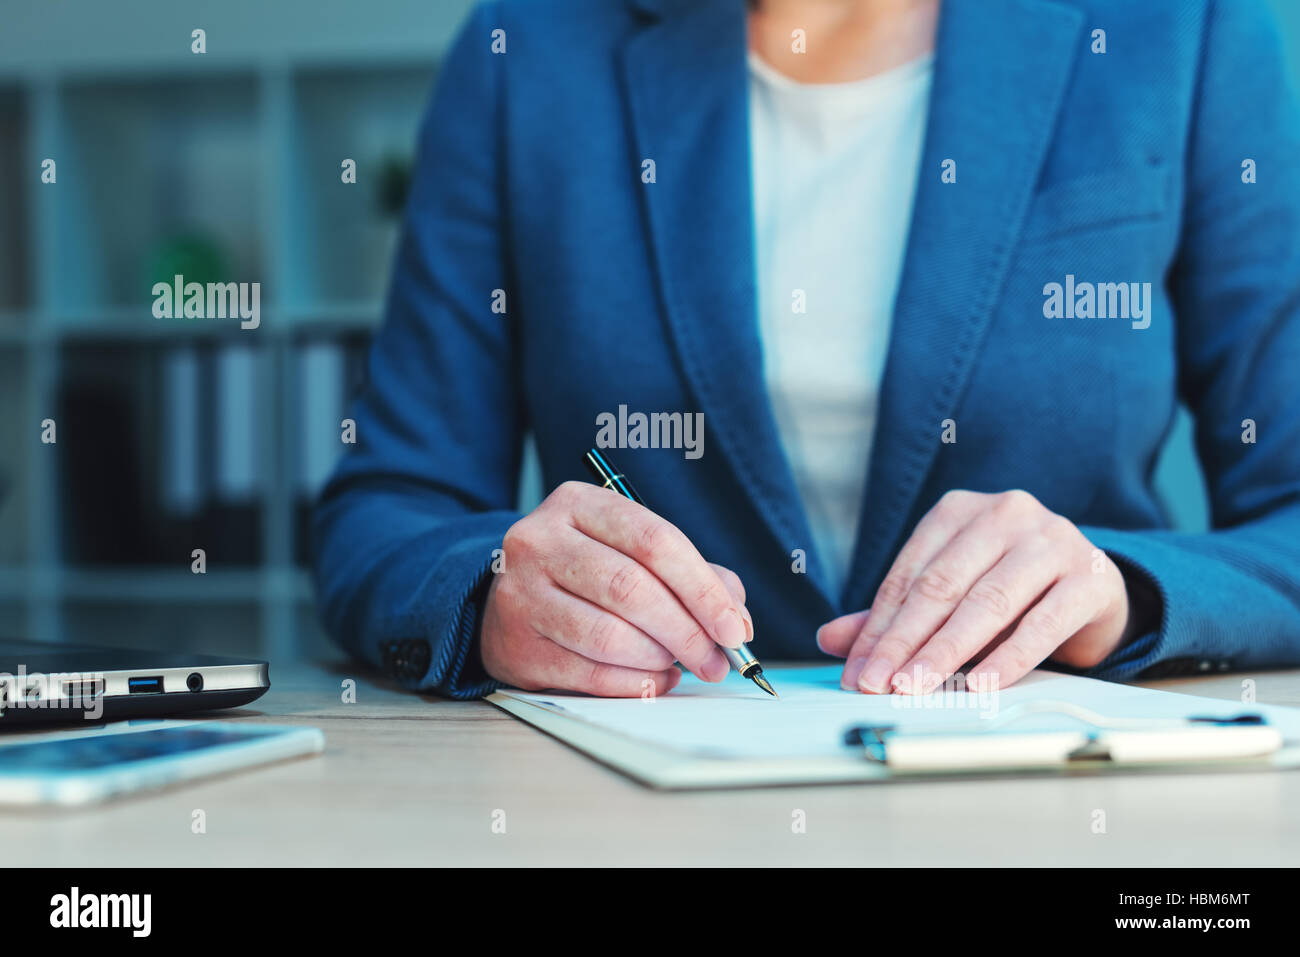 Business agreement signing, businesswoman handwriting signature on contract document at office desk Stock Photo